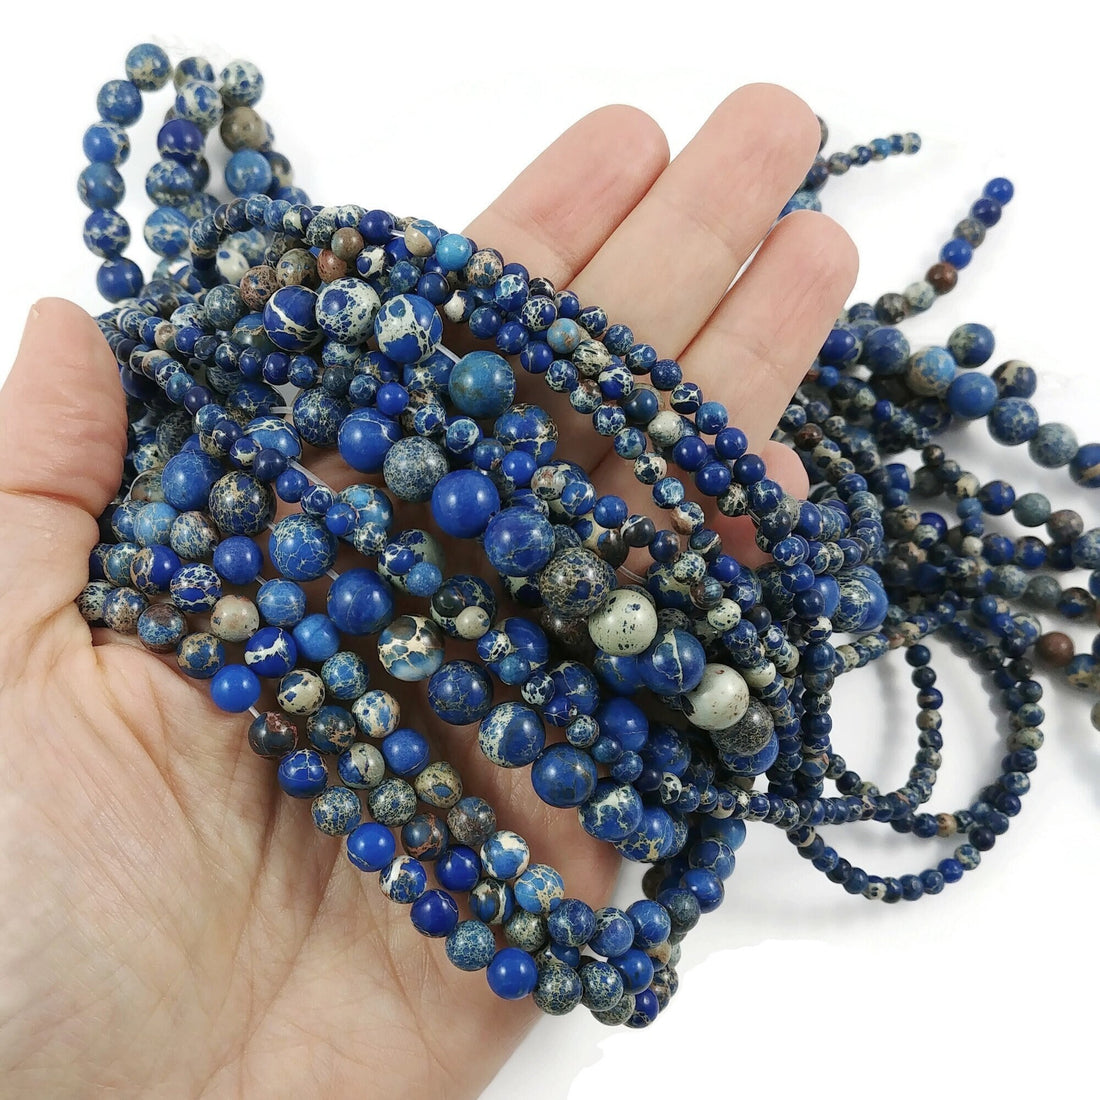 Blue imperial jasper stone beads, 4mm, 6mm, 8mm round gemstone for jewelry making